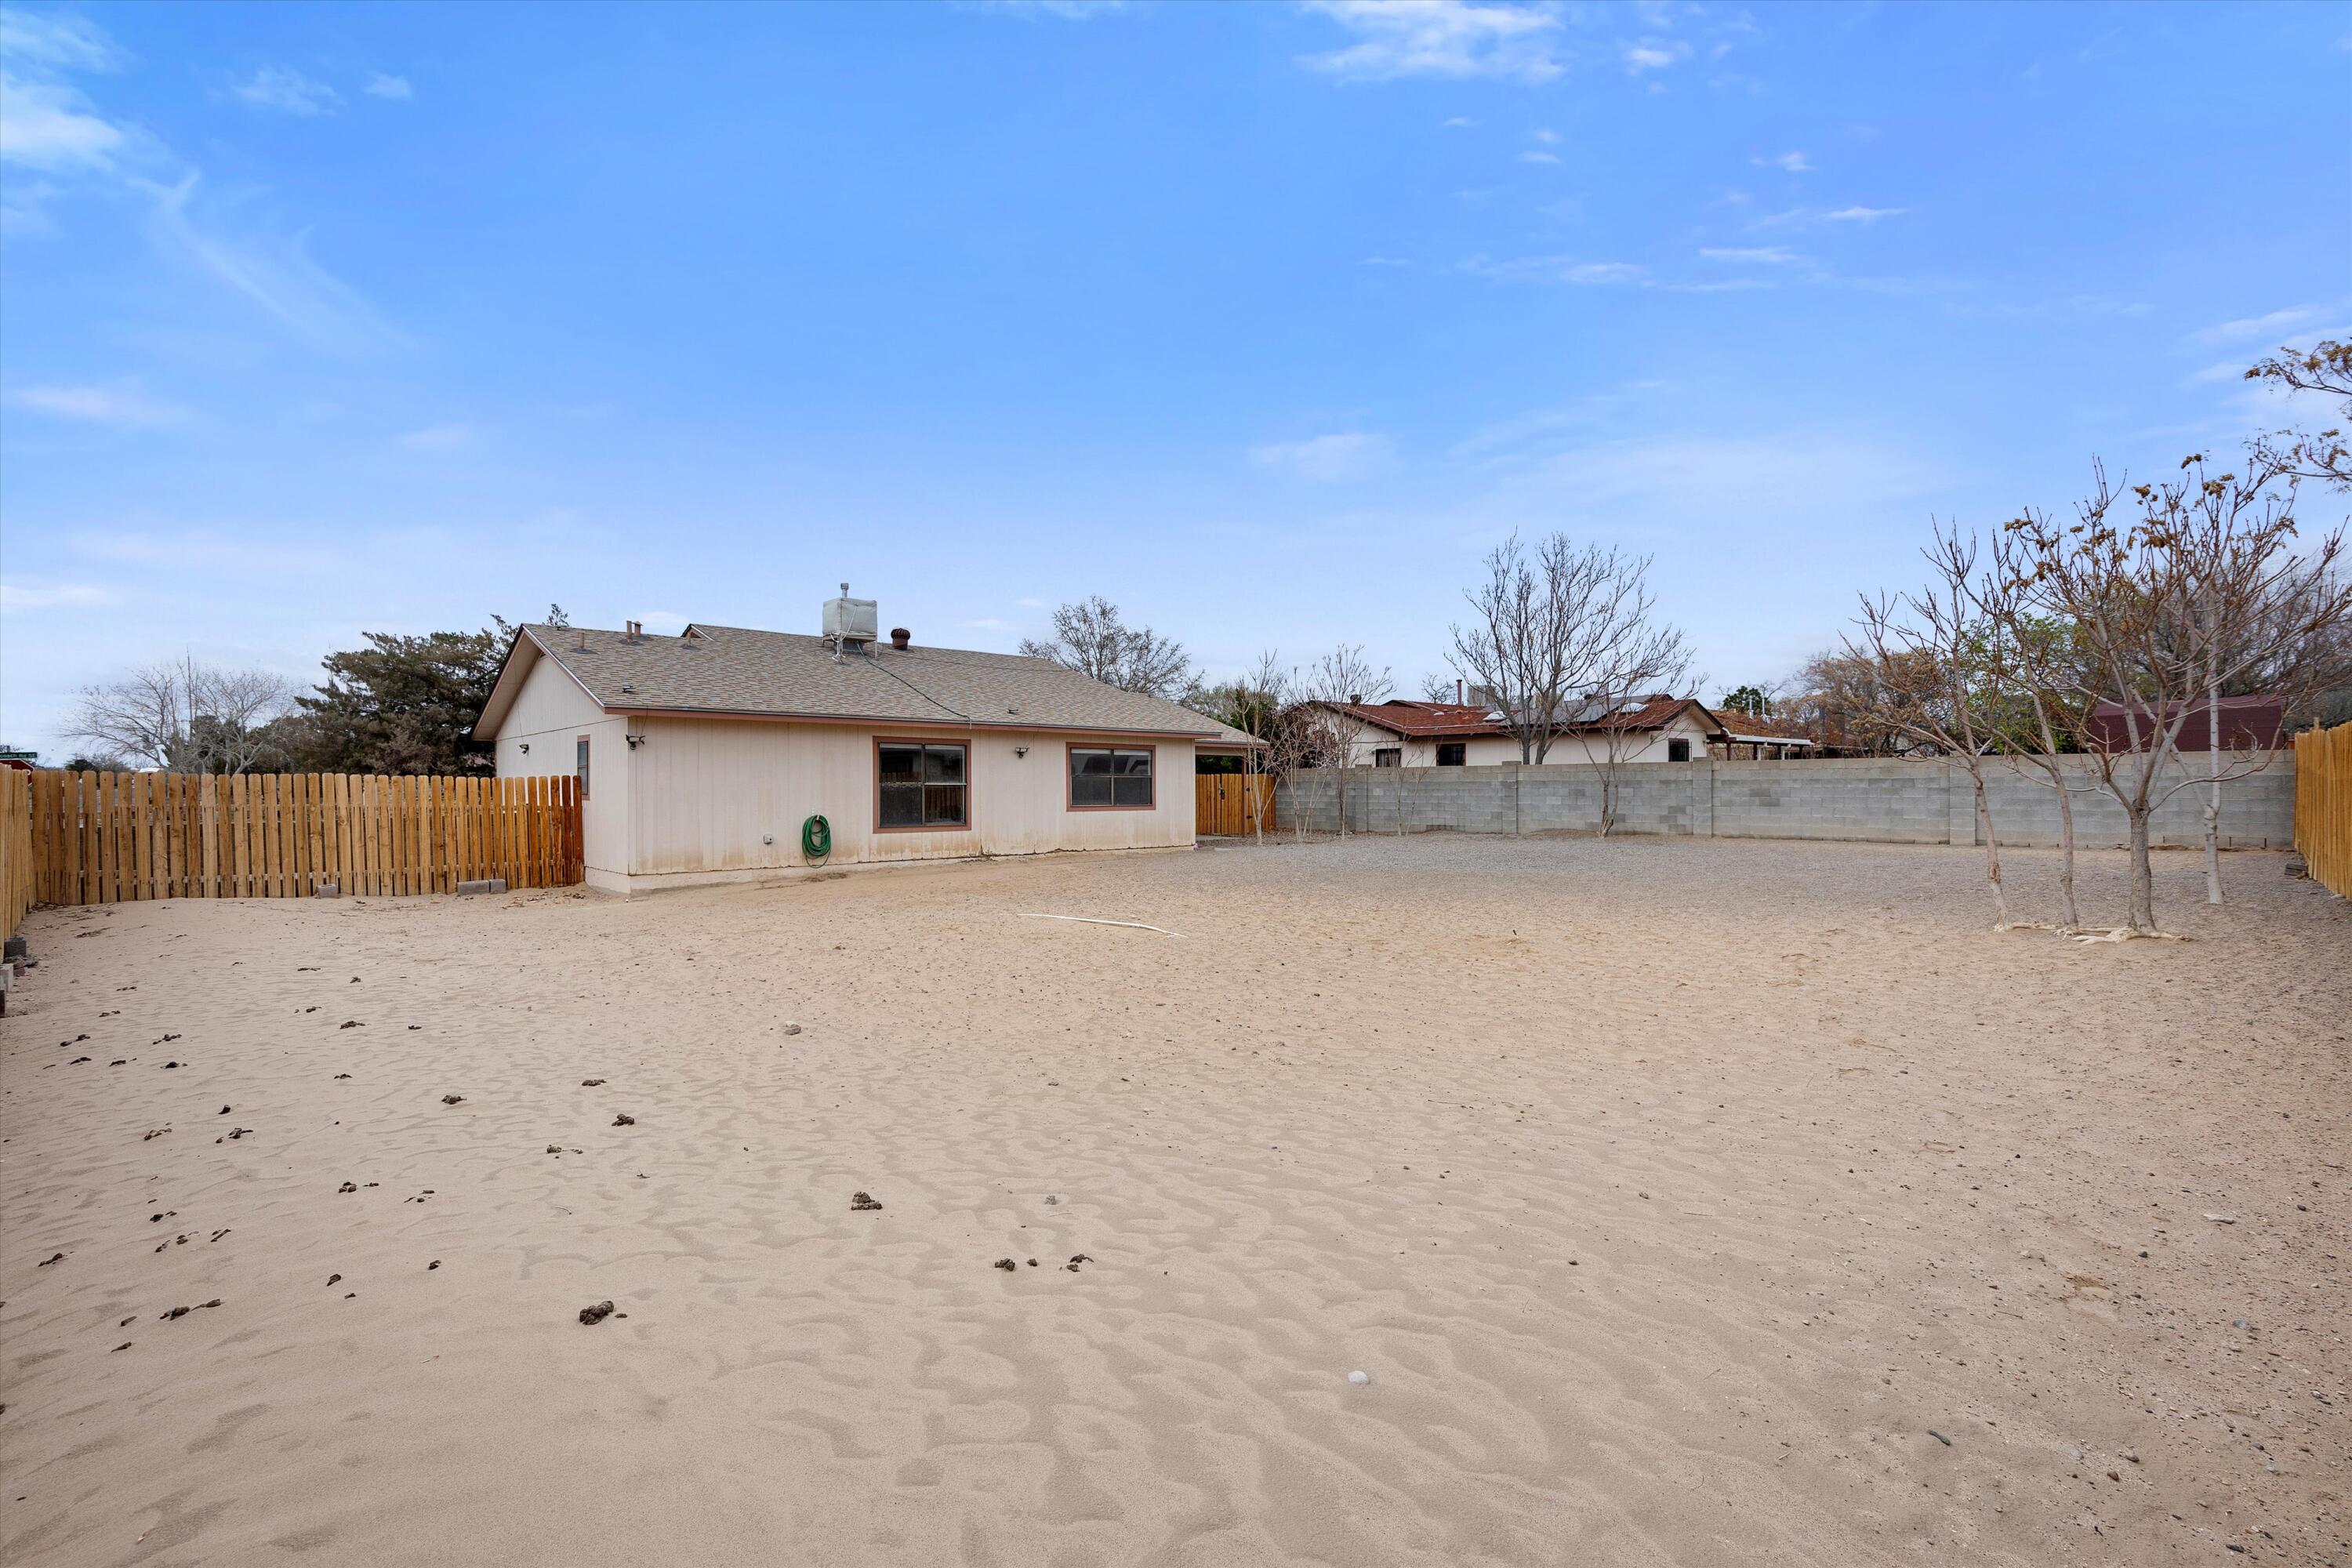 744 Stagecoach Road SE, Rio Rancho, New Mexico 87124, 3 Bedrooms Bedrooms, ,2 BathroomsBathrooms,Residential,For Sale,744 Stagecoach Road SE,1059112